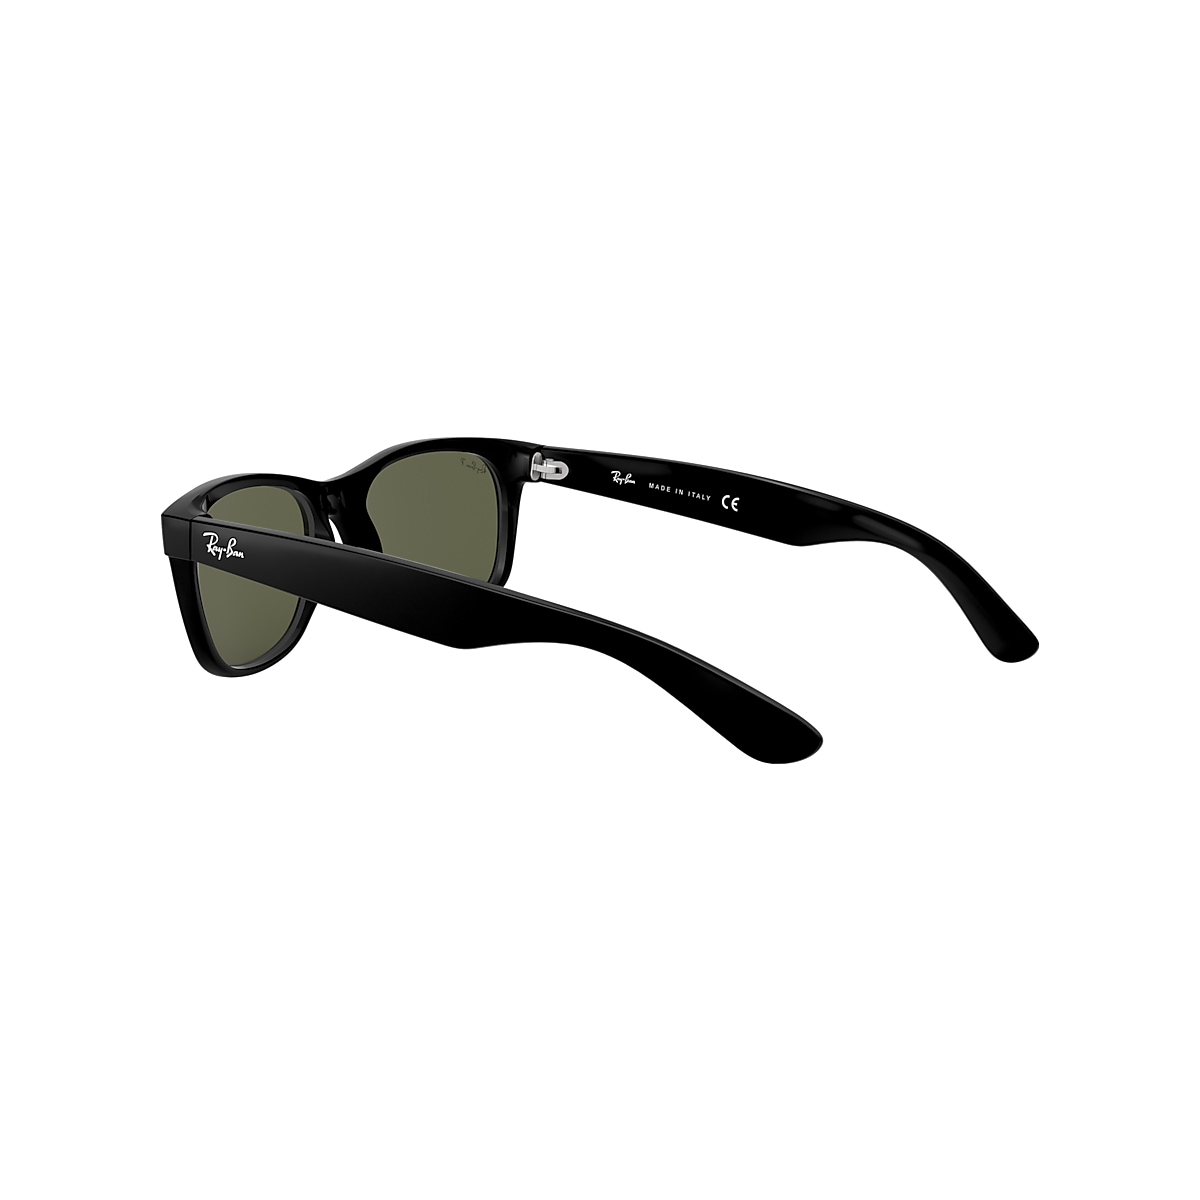 NEW WAYFARER CLASSIC Sunglasses in Black and Green - RB2132 | Ray 